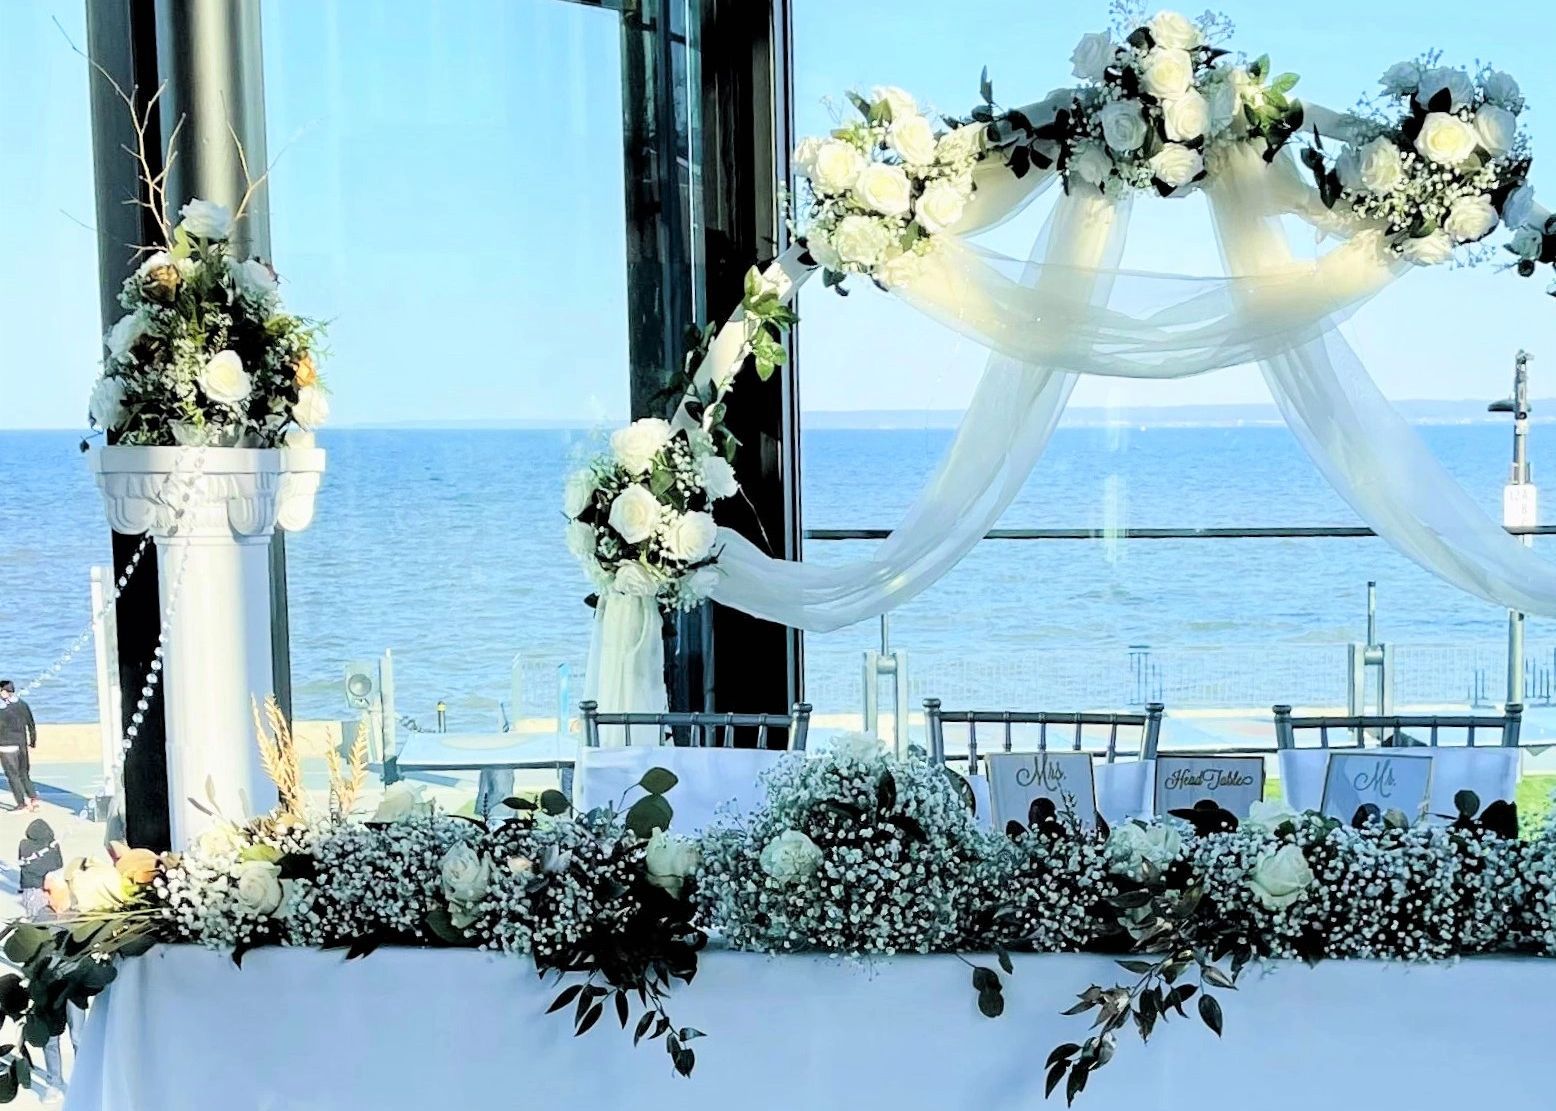 Bridal party head table with baby's breath and white roses and coloums overlooking the lake 